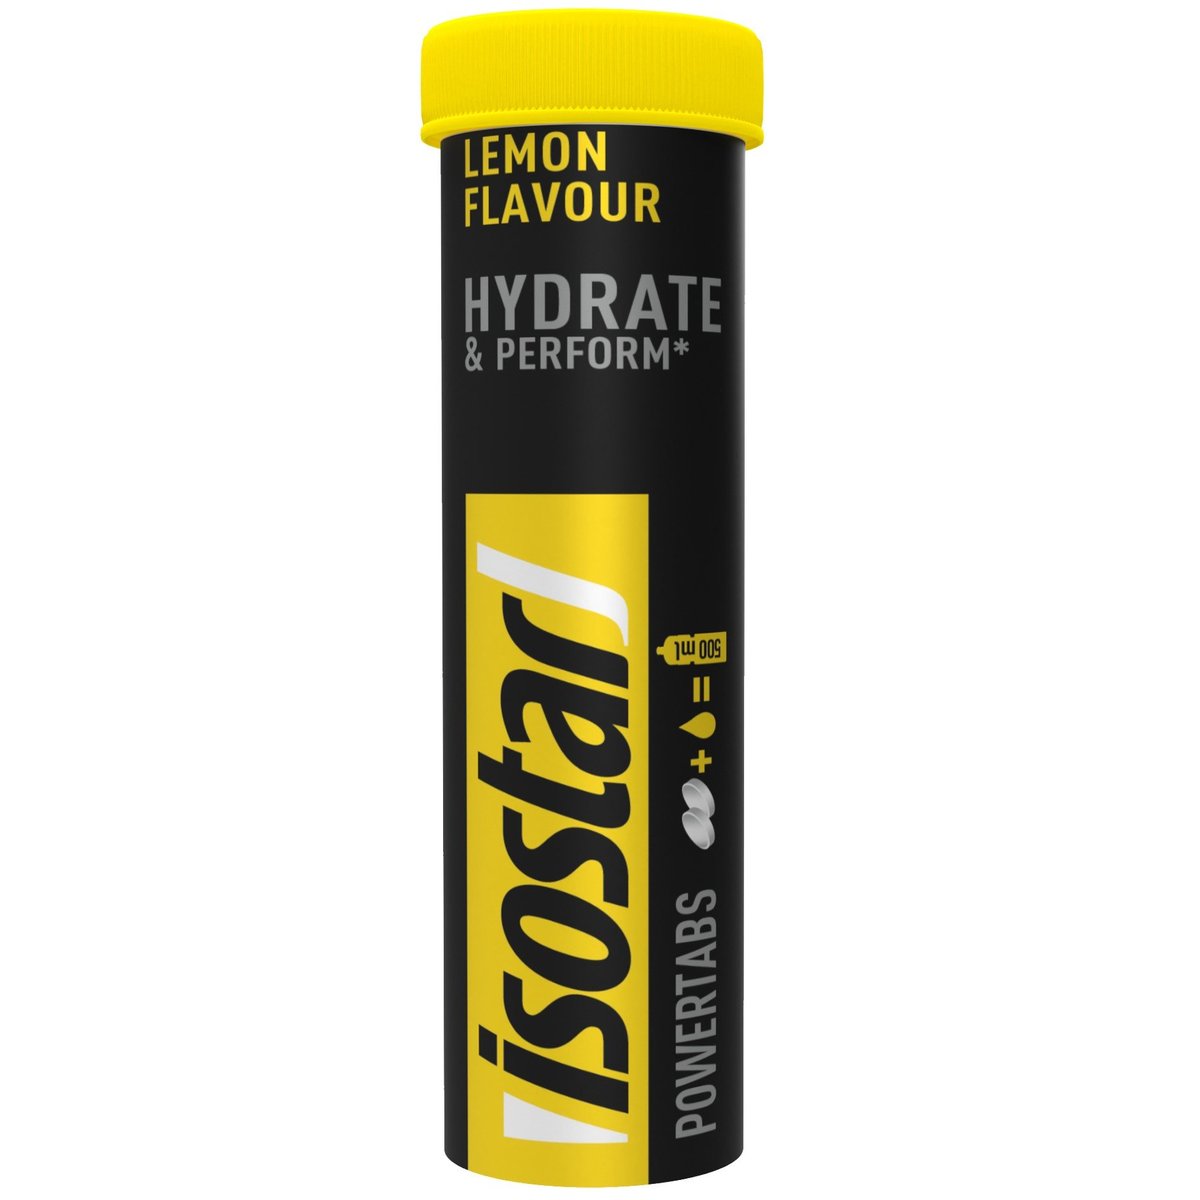 Isostar Hydrate & perform tablety citron